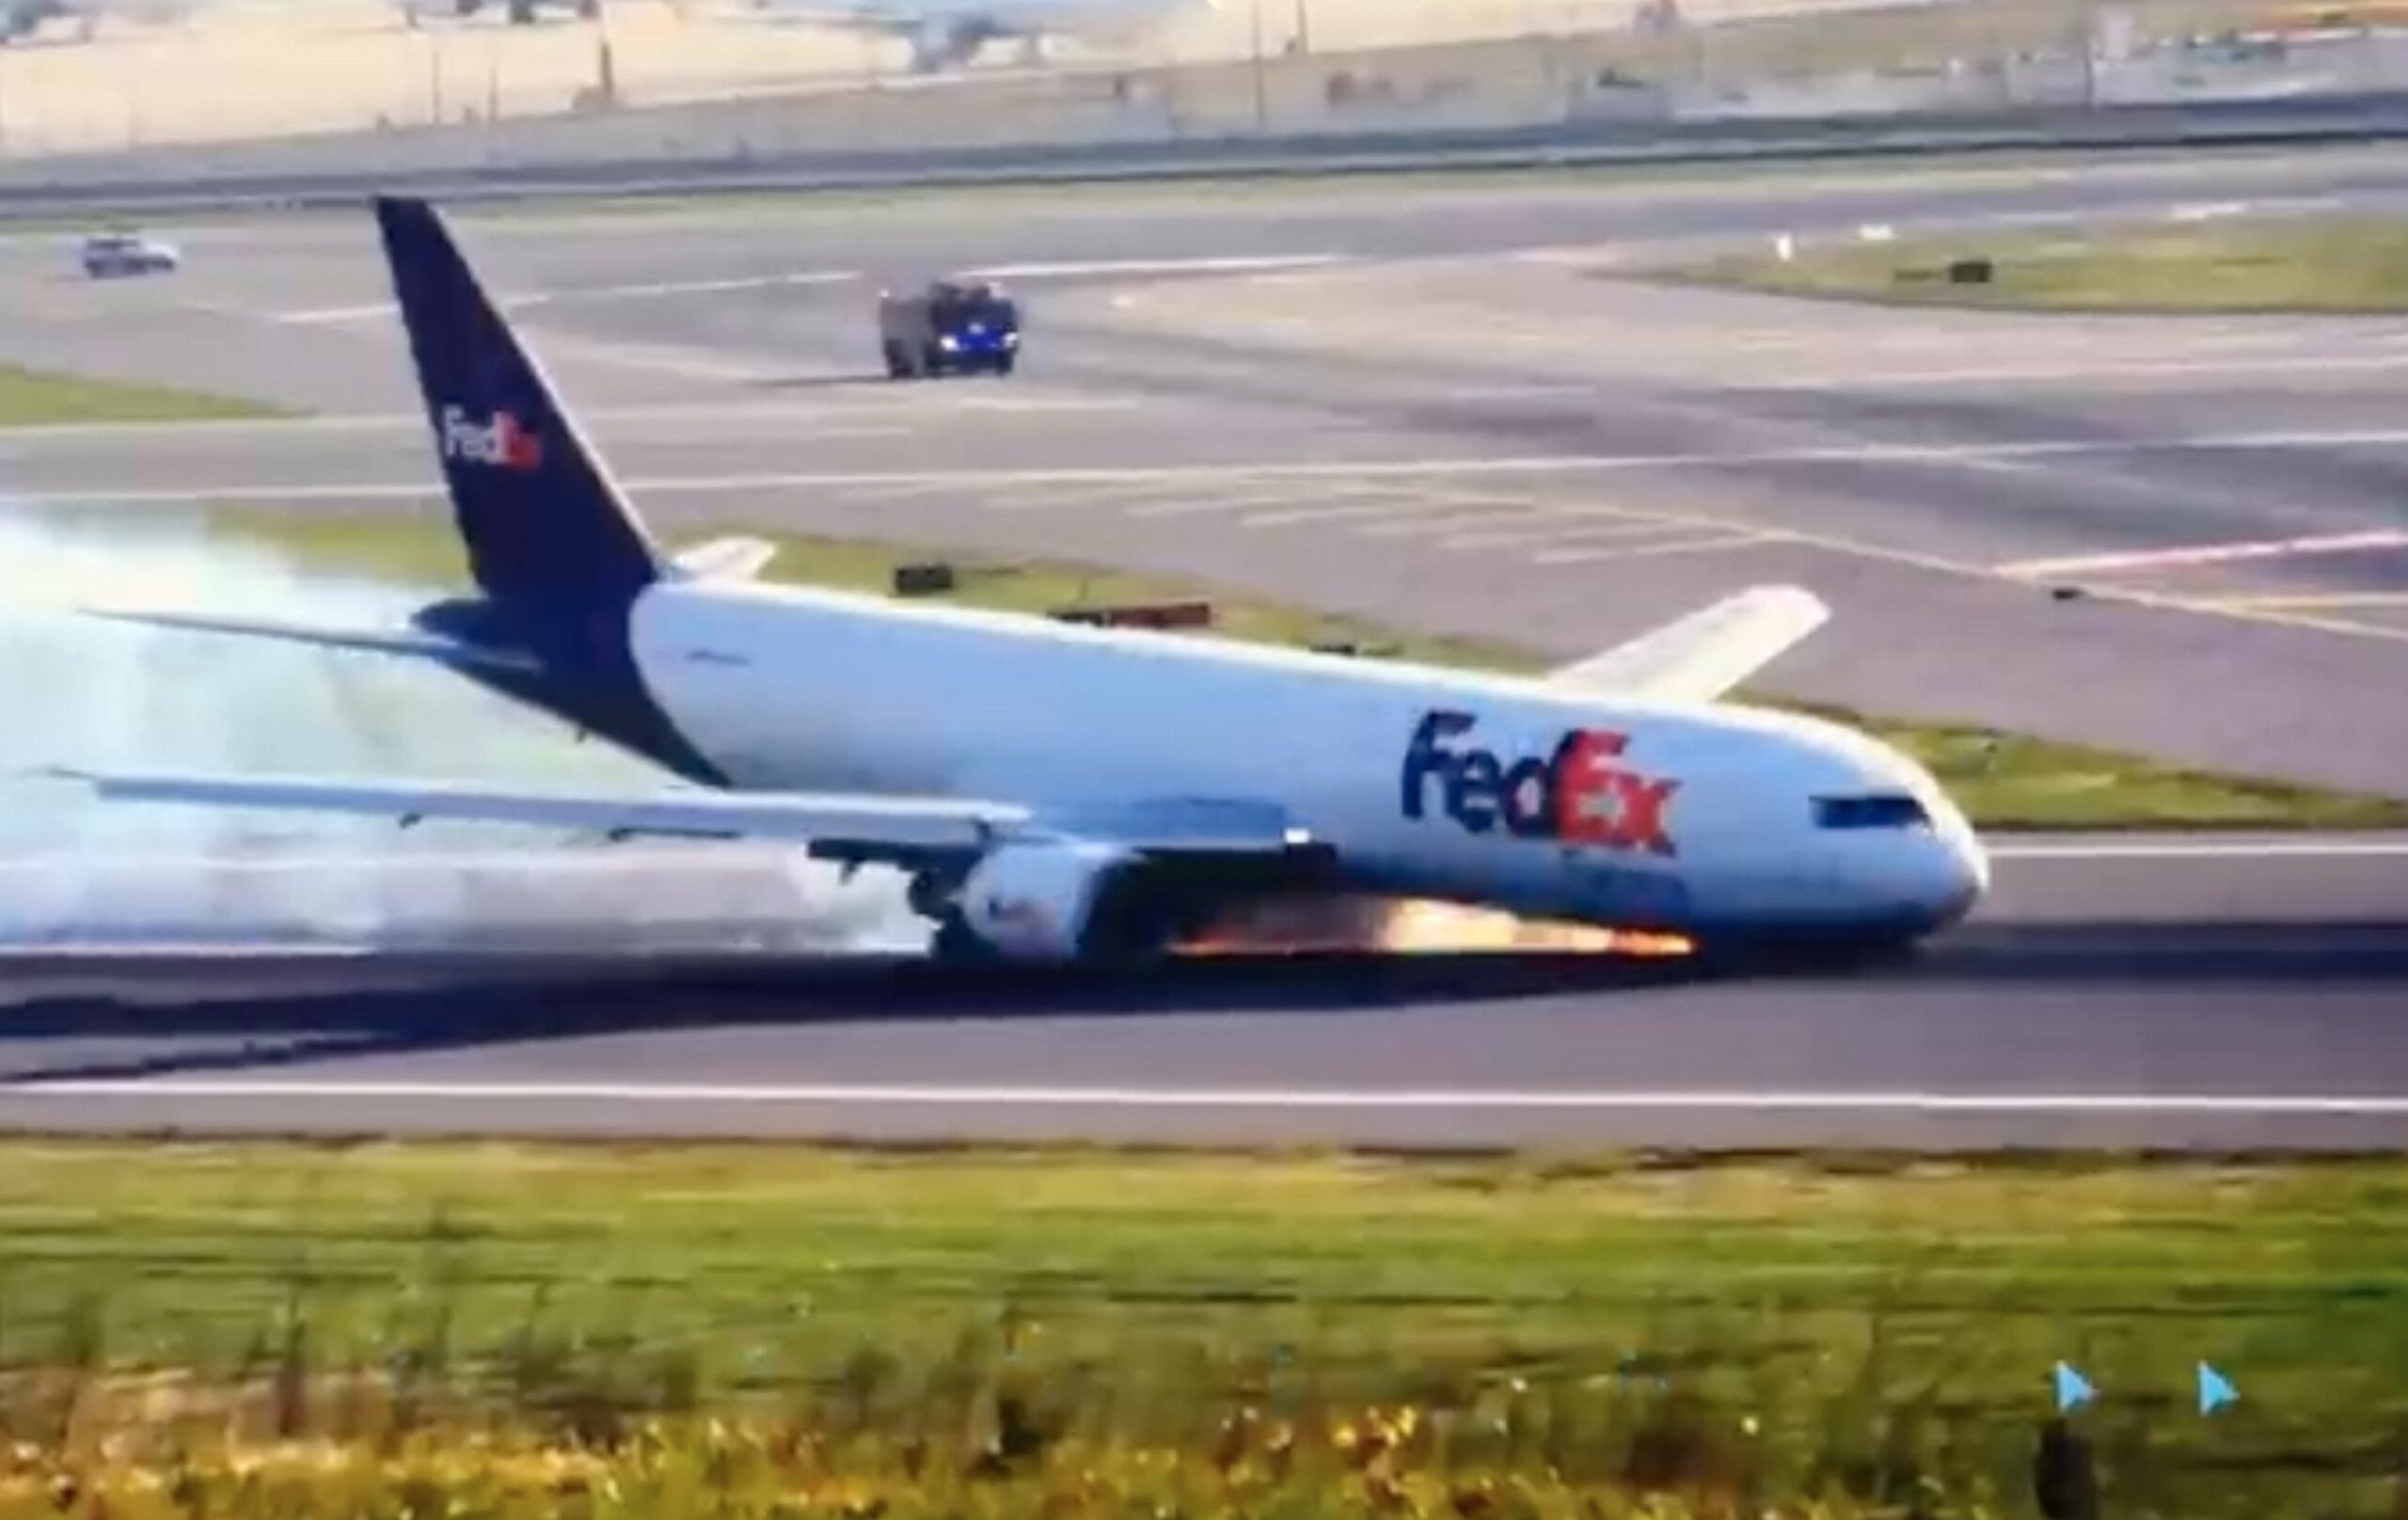 Say What Now? Boeing 767 Plane Crash Lands on Runway, Front Landing Gear Fails